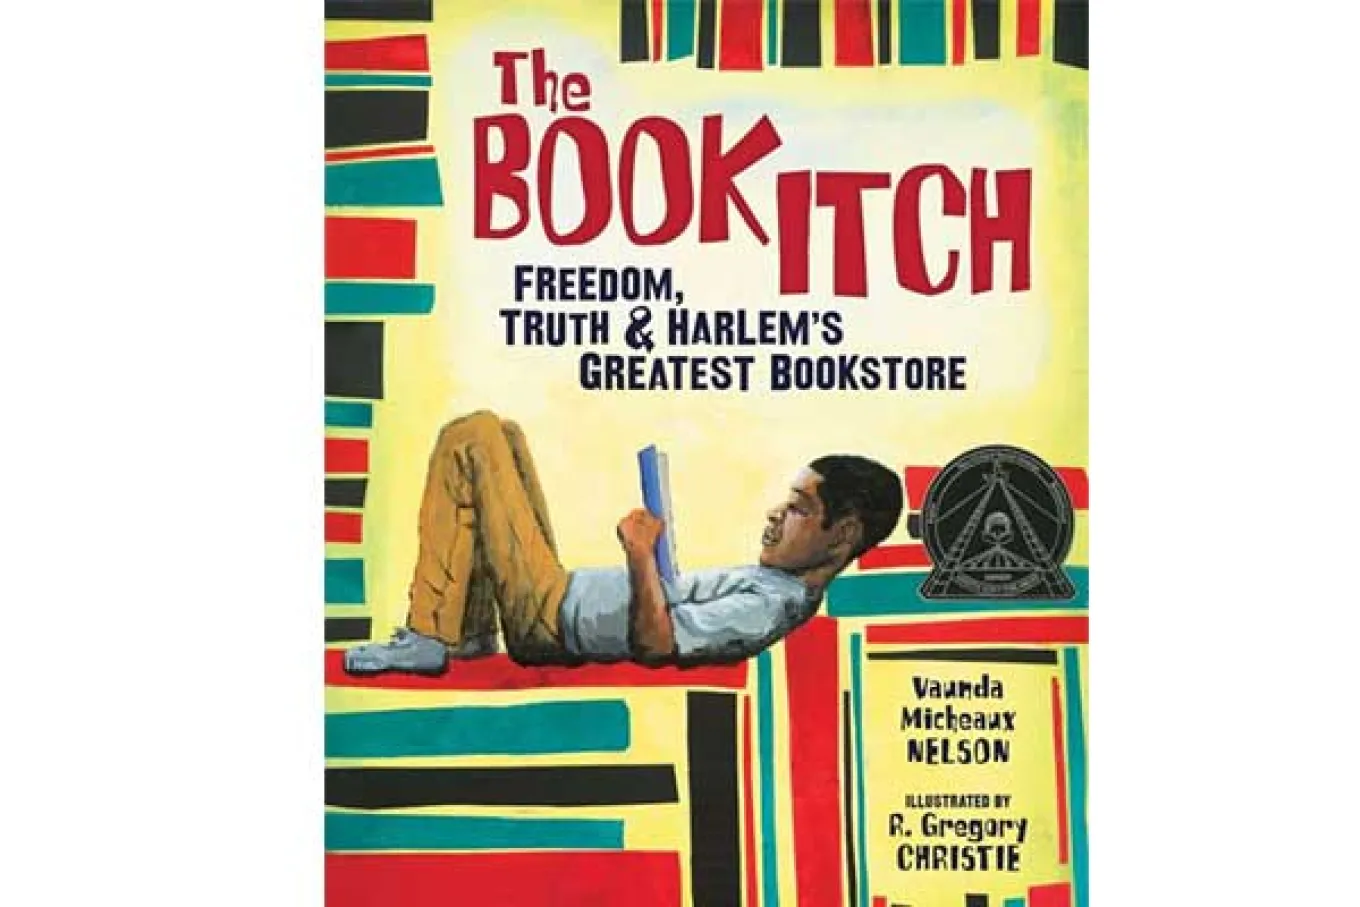 The Book Itch